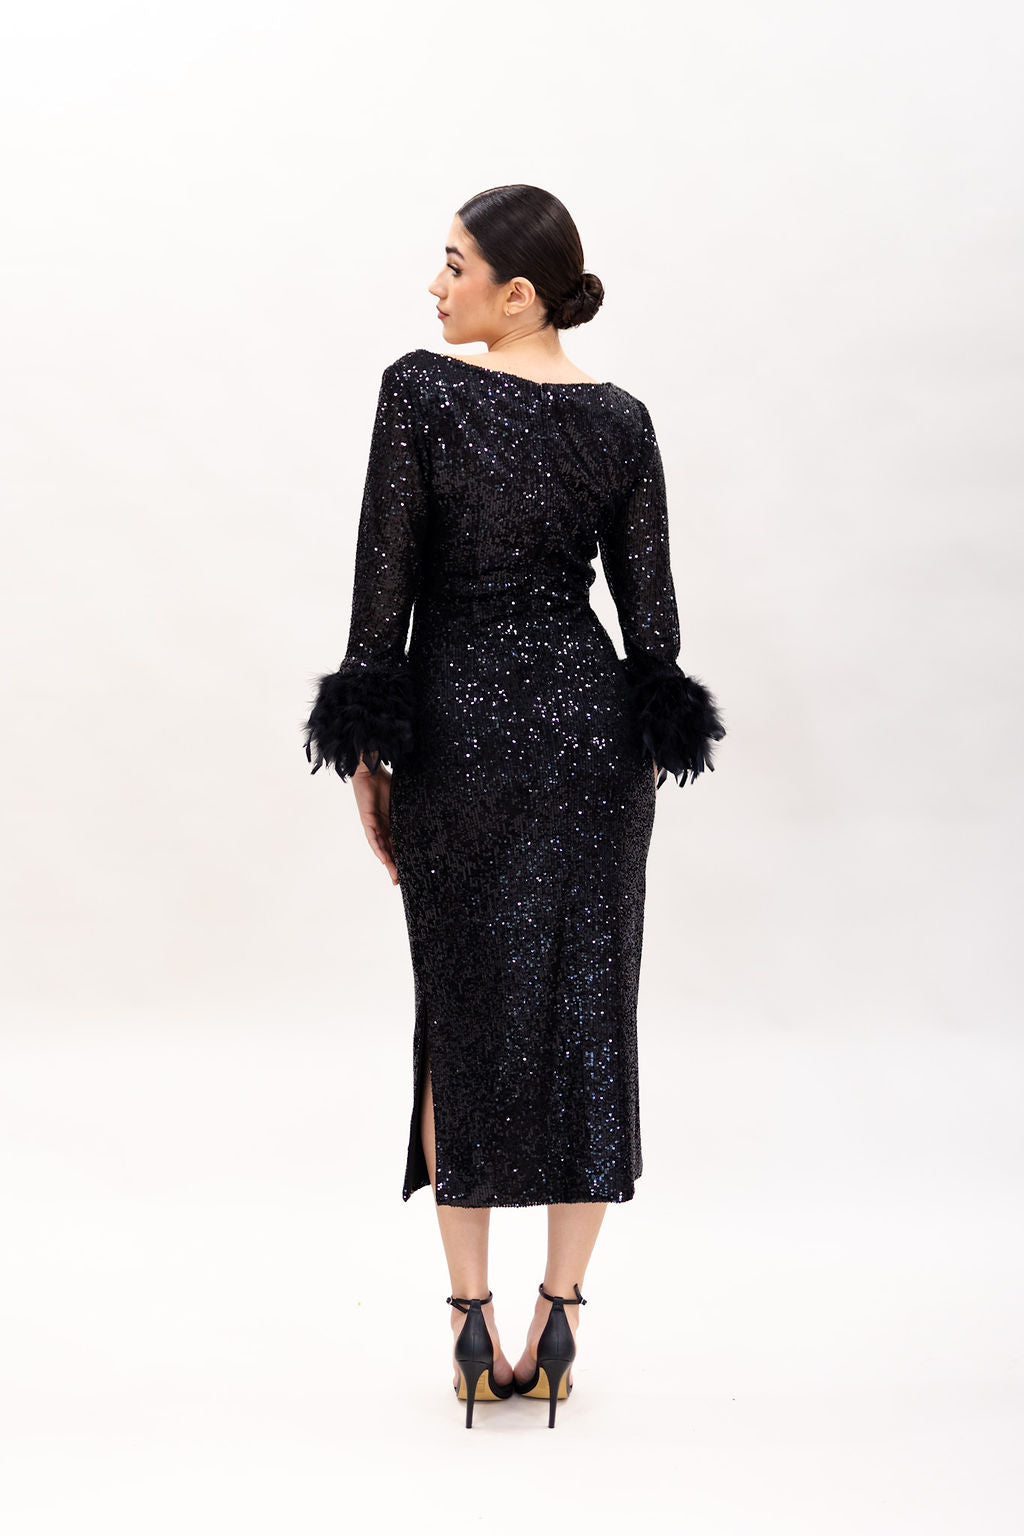 THE SEQUIN BLACK DRESS WITH FEATHERS